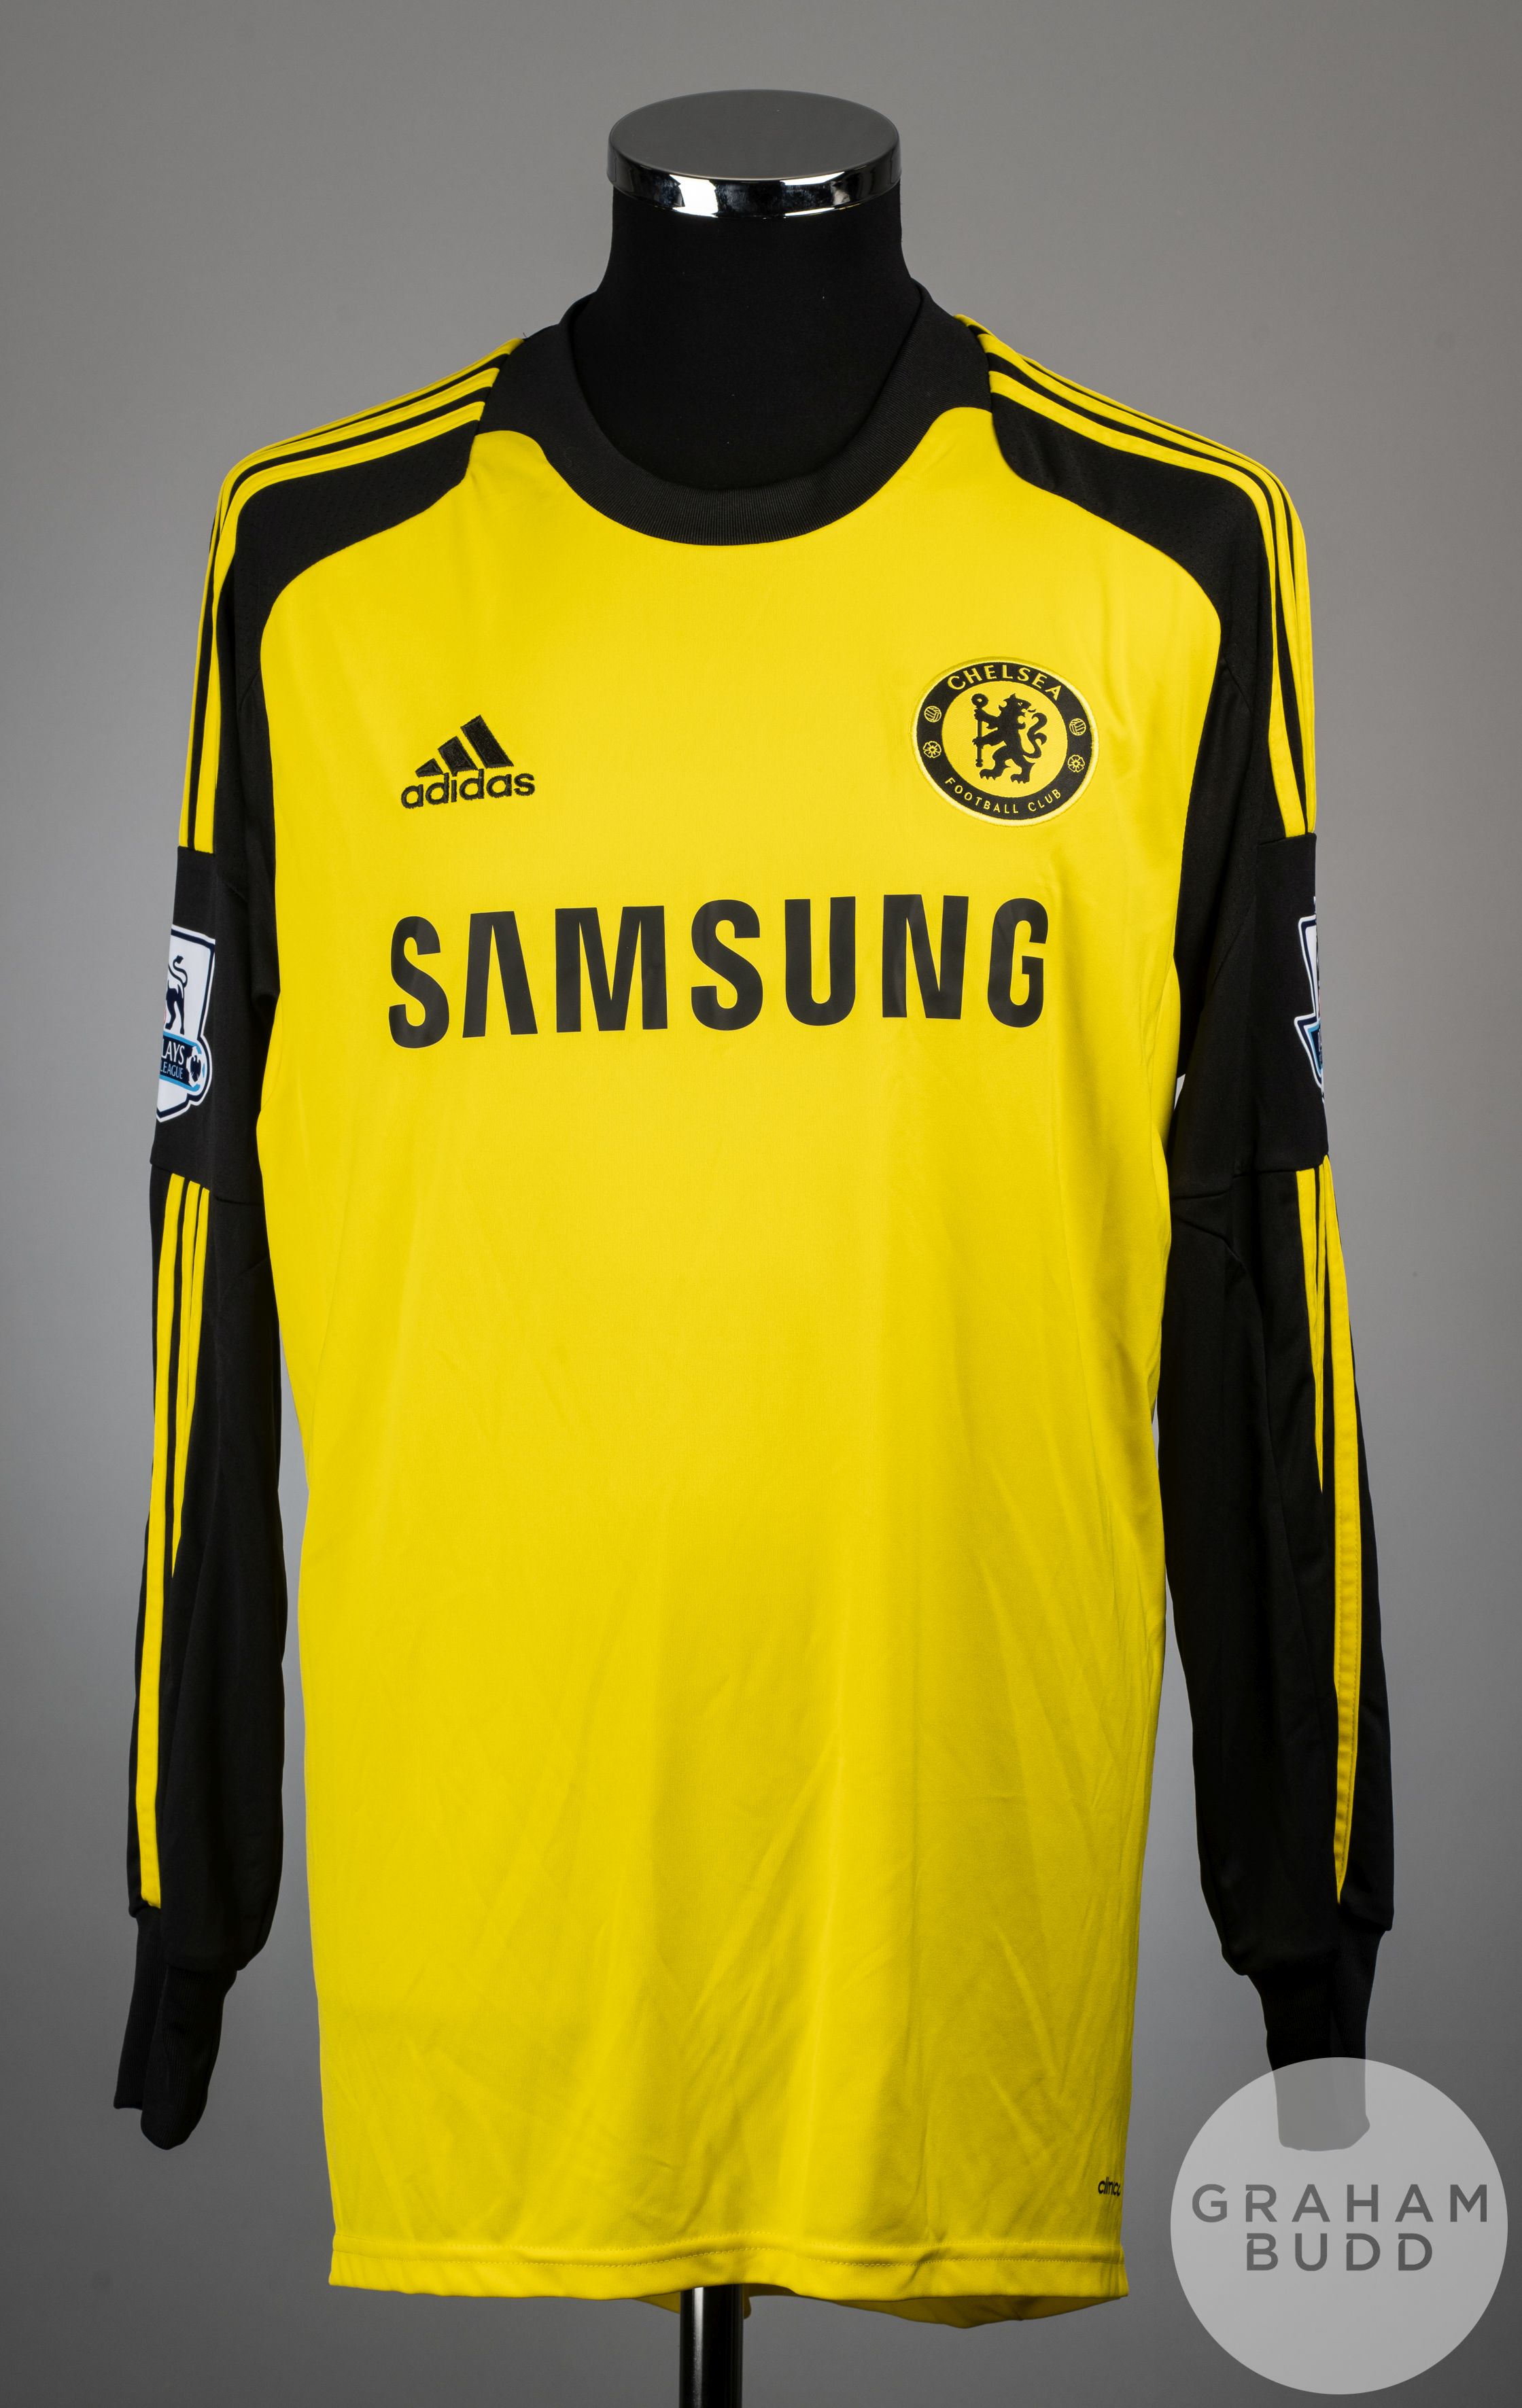 Petr Cech yellow and black No.1 Chelsea match worn long-sleeved shirt, 2013-14